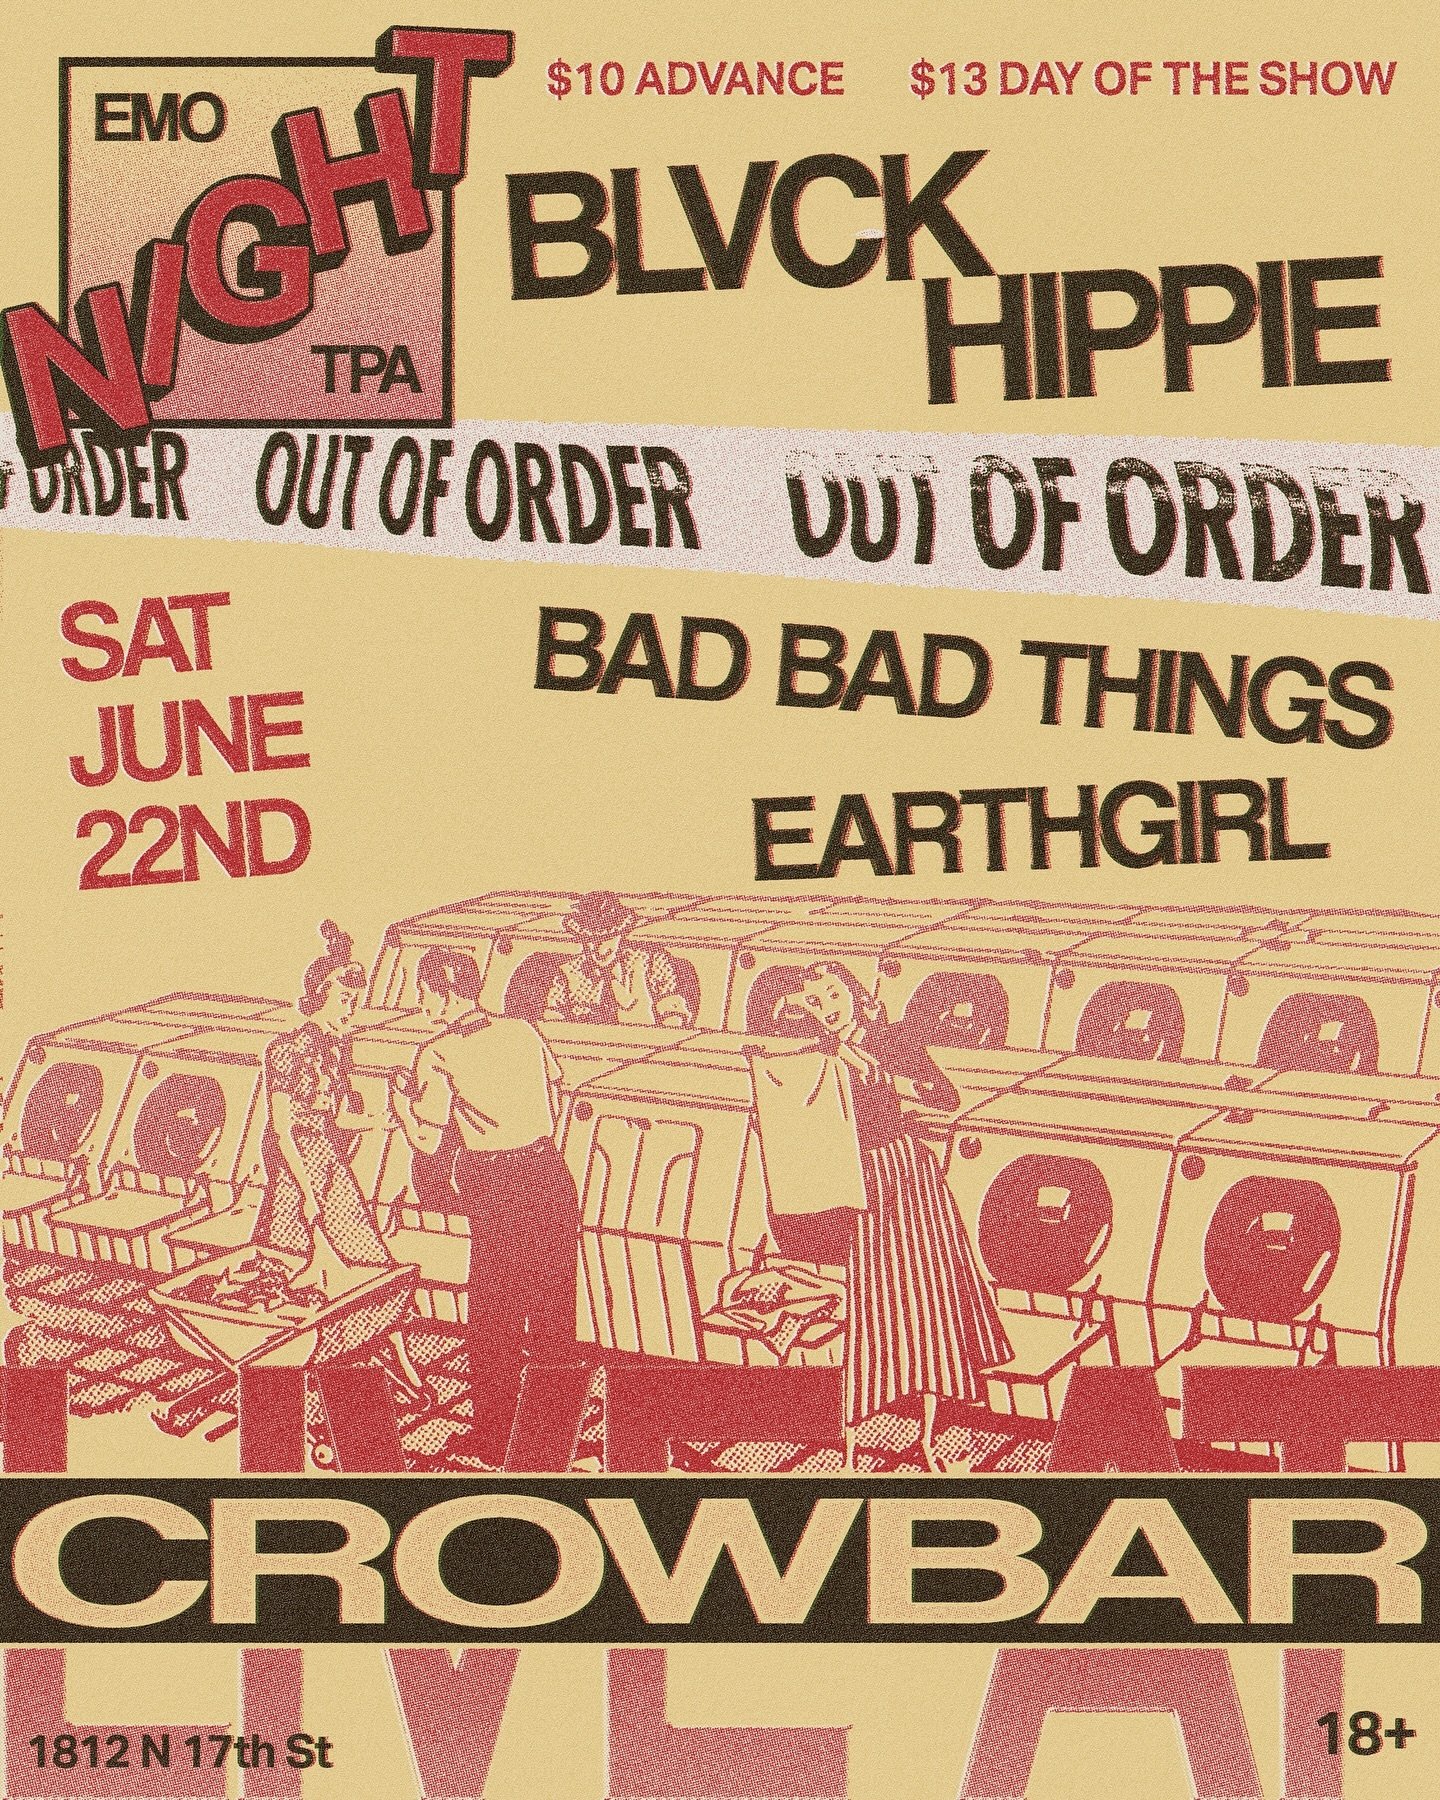 Been sittin on this one for a while now. We are STOKED to have @blvckhippie901 playing our LAST SHOW of the summer. Joining them will be @bad.bad.things &amp; @earthgirlmusic &amp; a 4th band (but we can&rsquo;t name em until June, so stay tuned for 